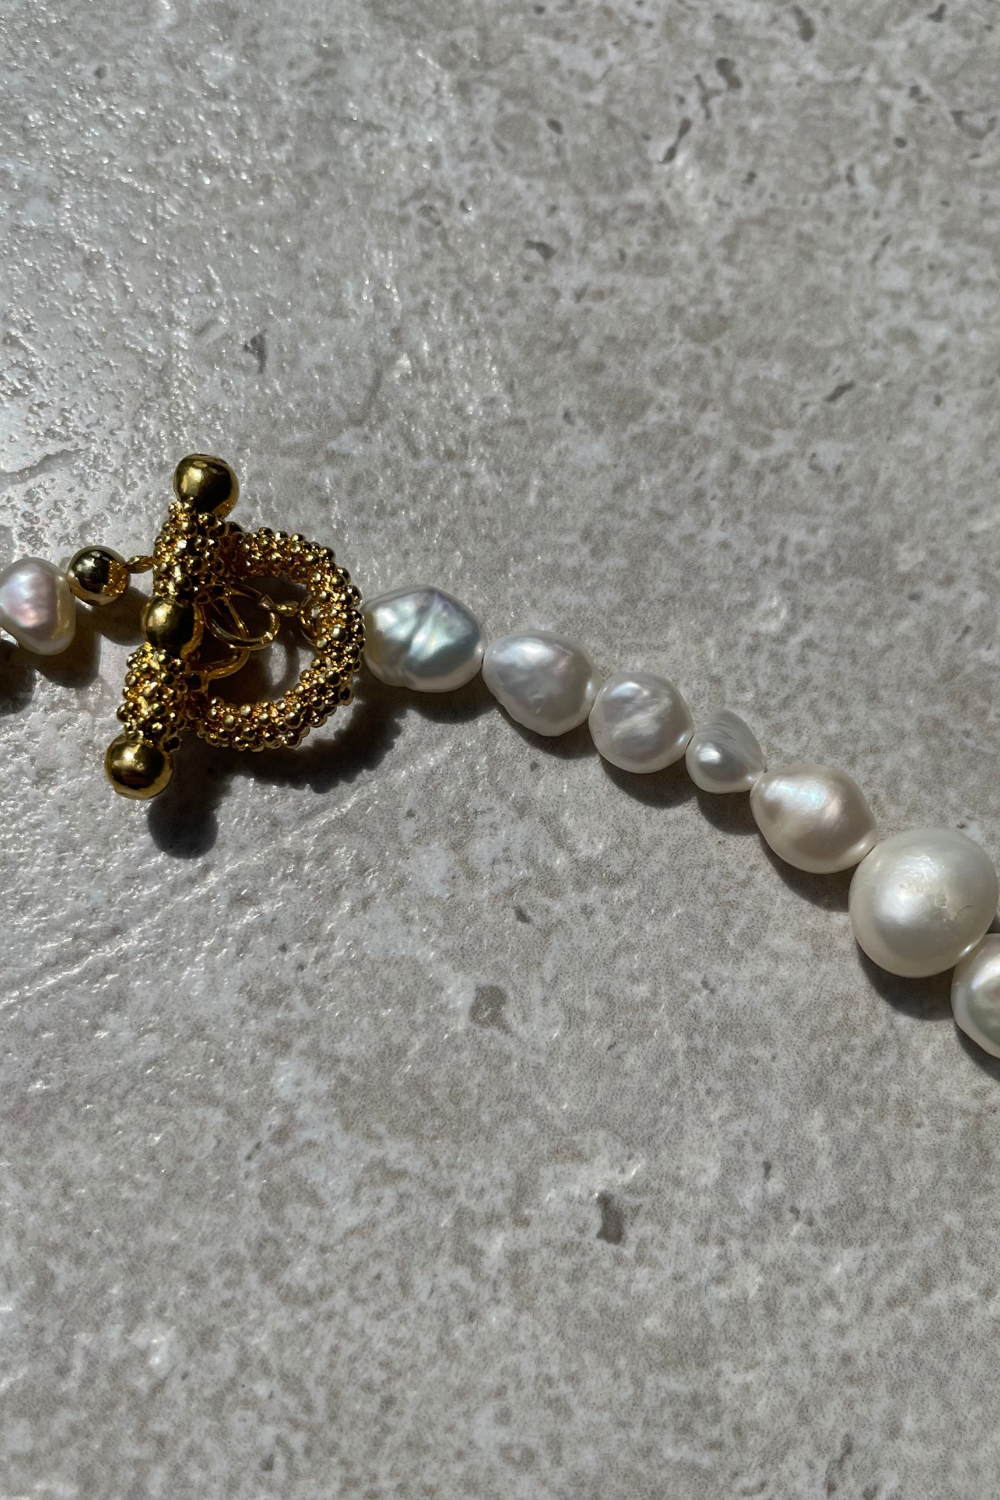 3 Ways to Identify Pearls in Vintage Jewelry - wikiHow